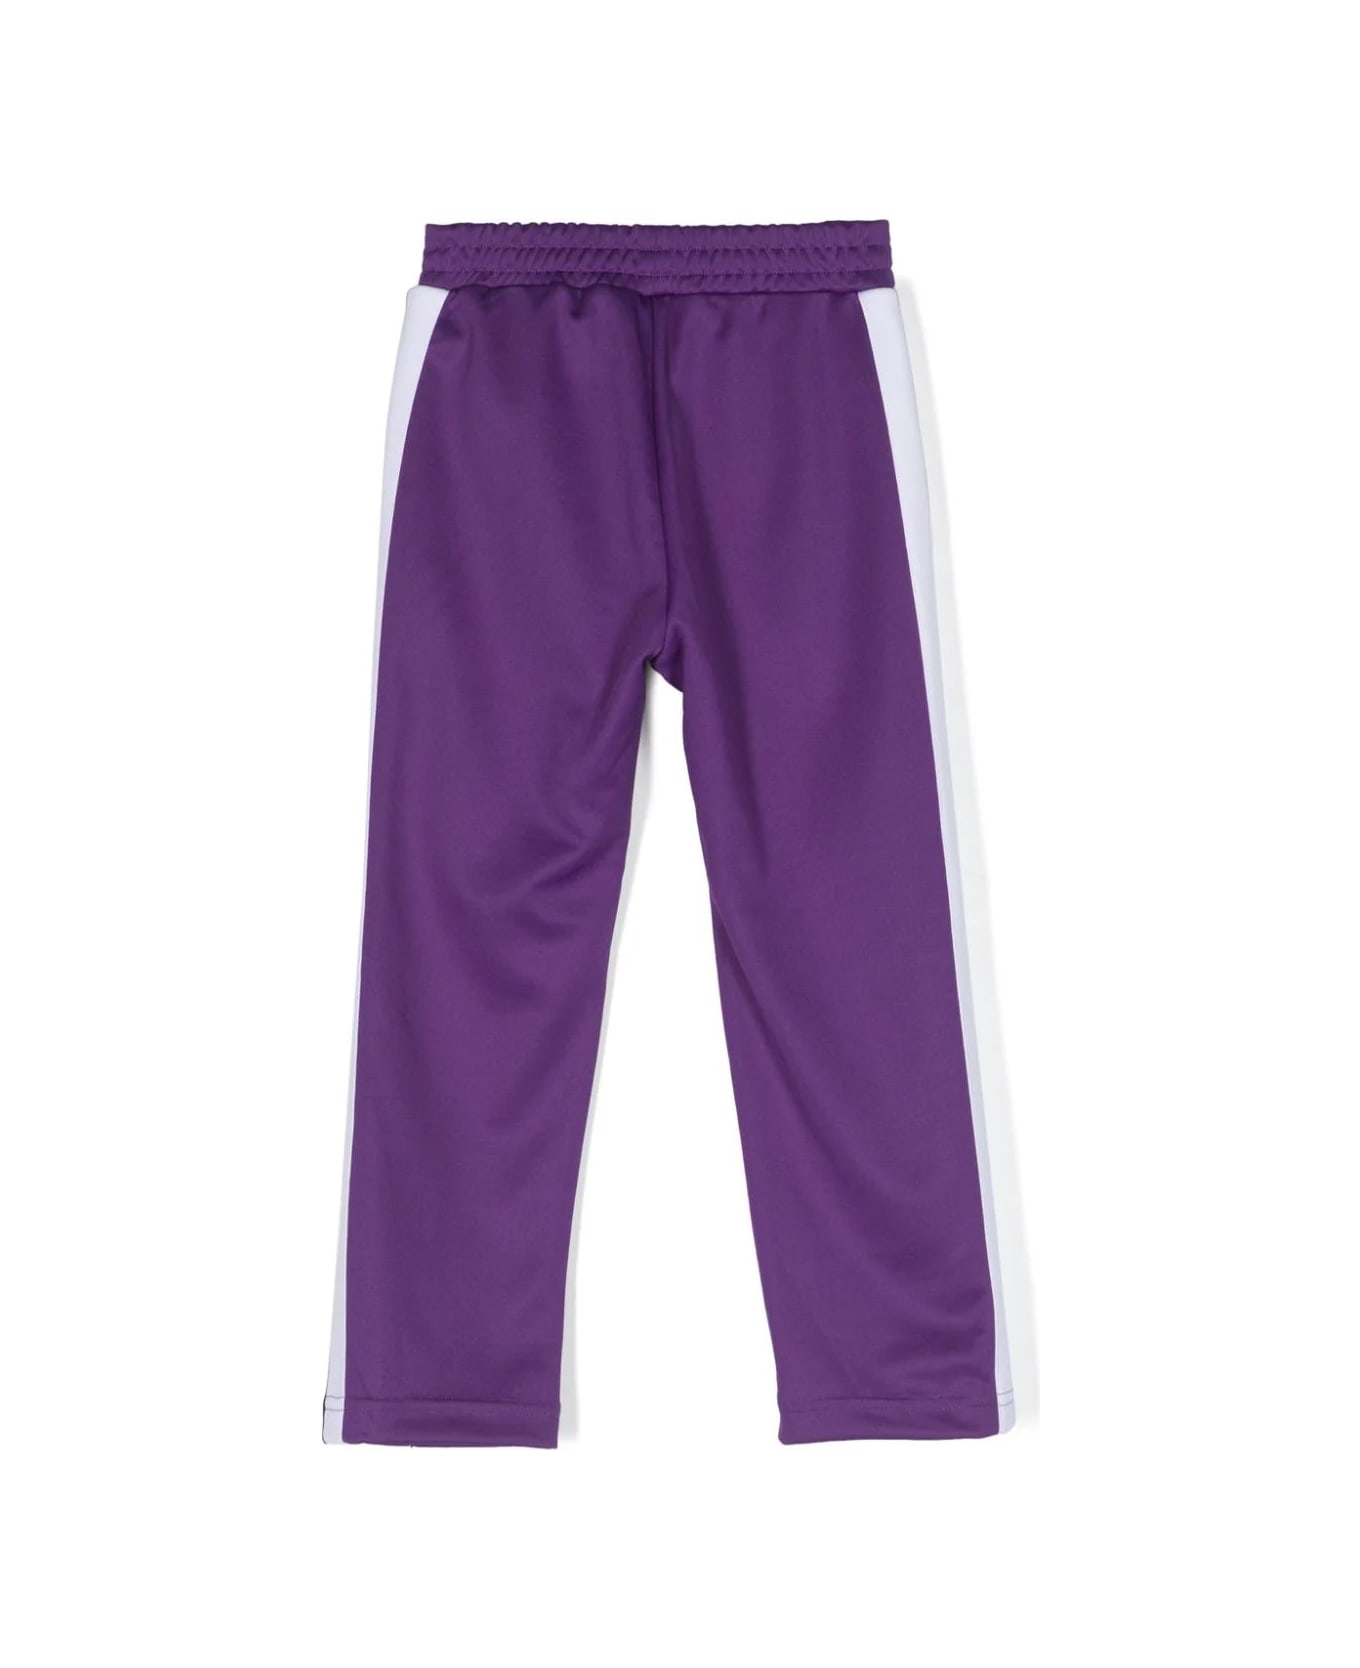 Palm Angels Purple Track Trousers With Logo - Purple